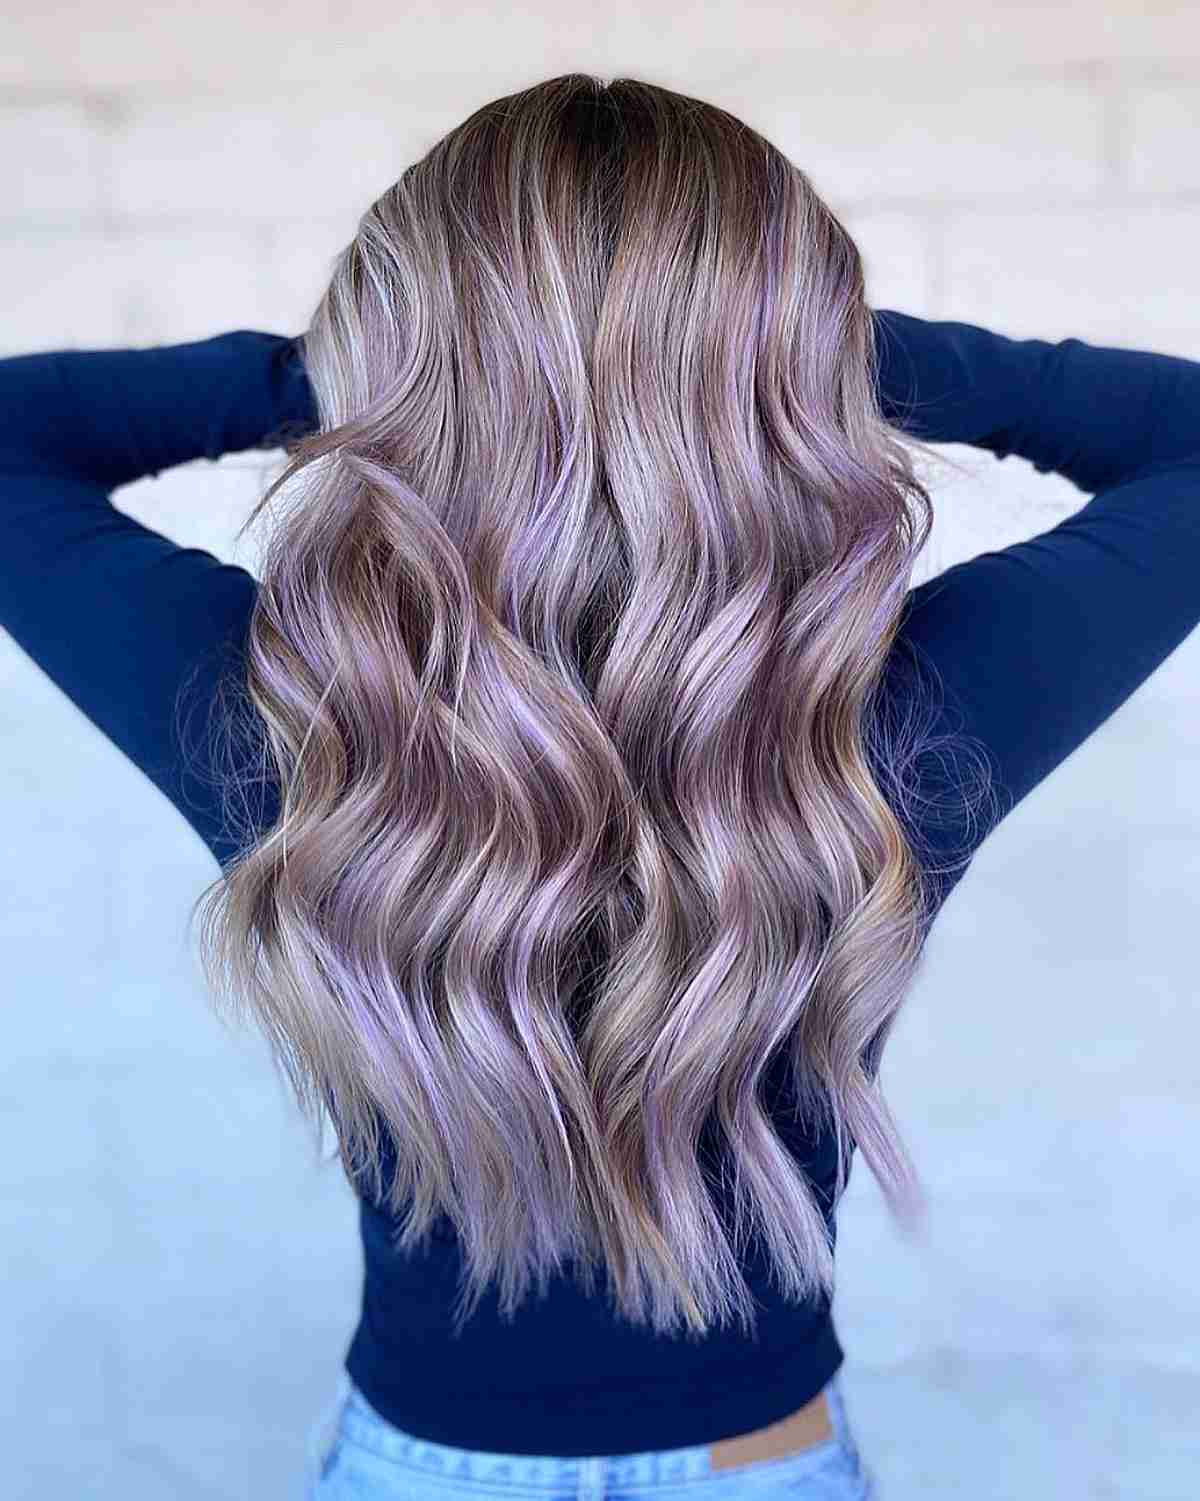 Frosty Lavender and Beige Blonde Winter Hair Colors